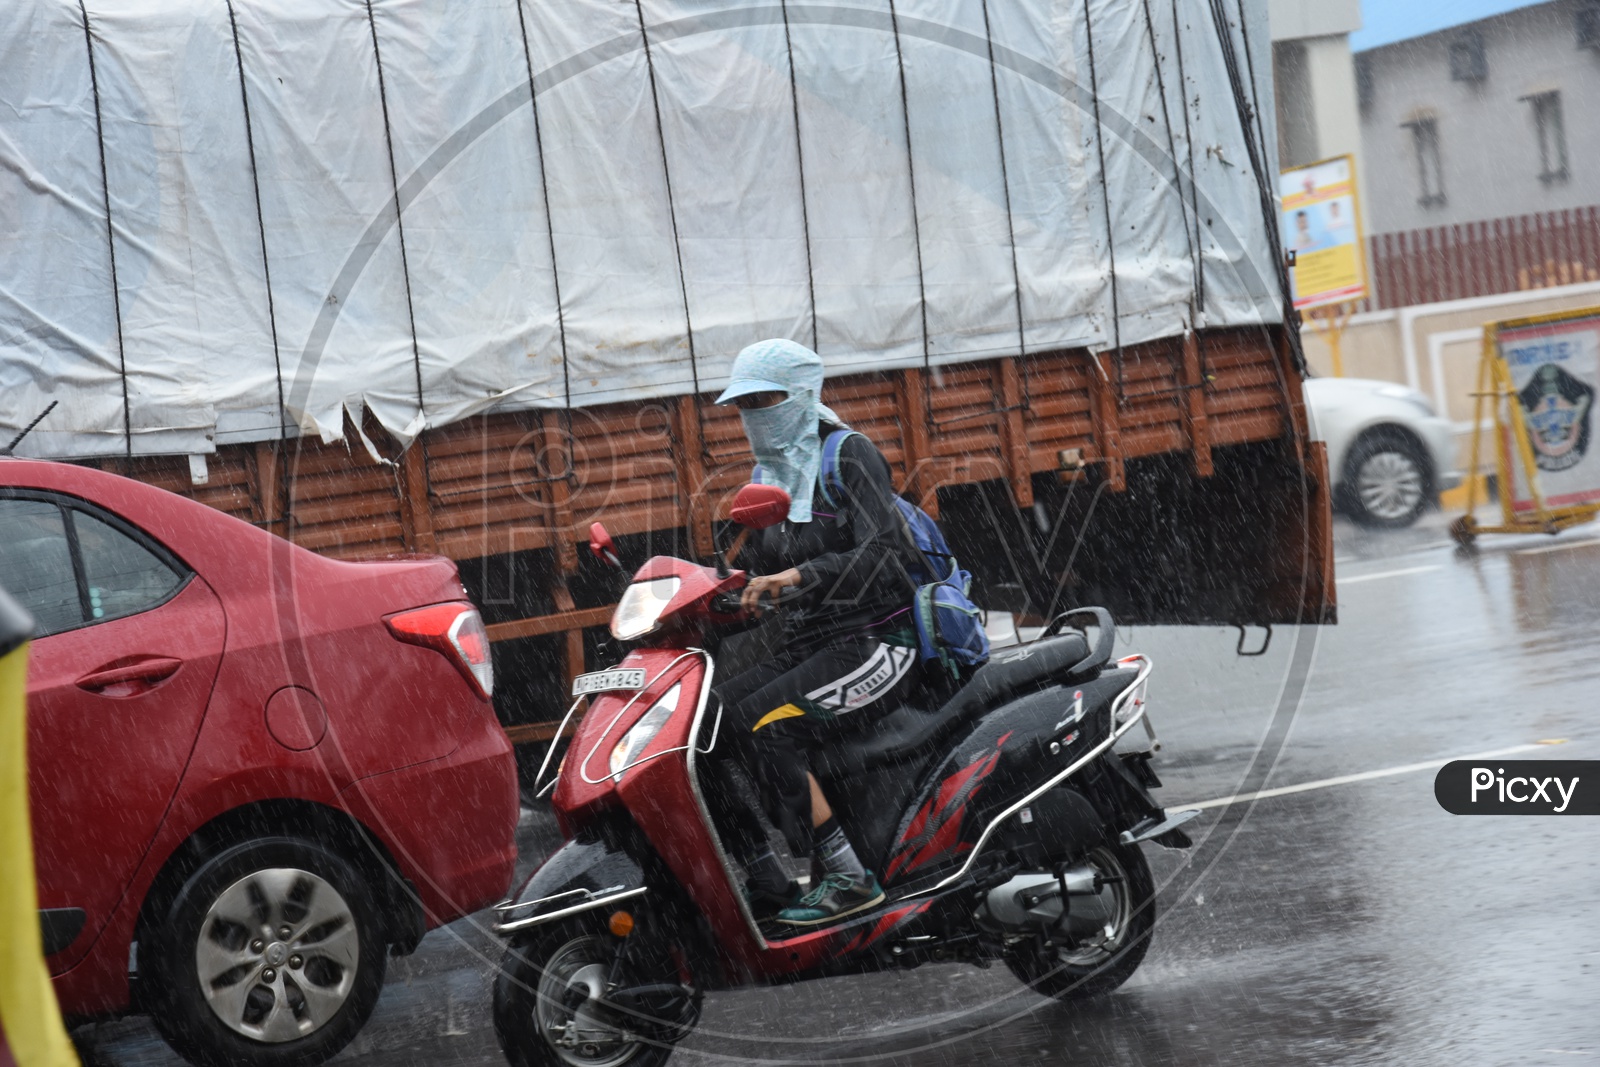 A Two Wheeler Commuter without Helmet driving in Rain